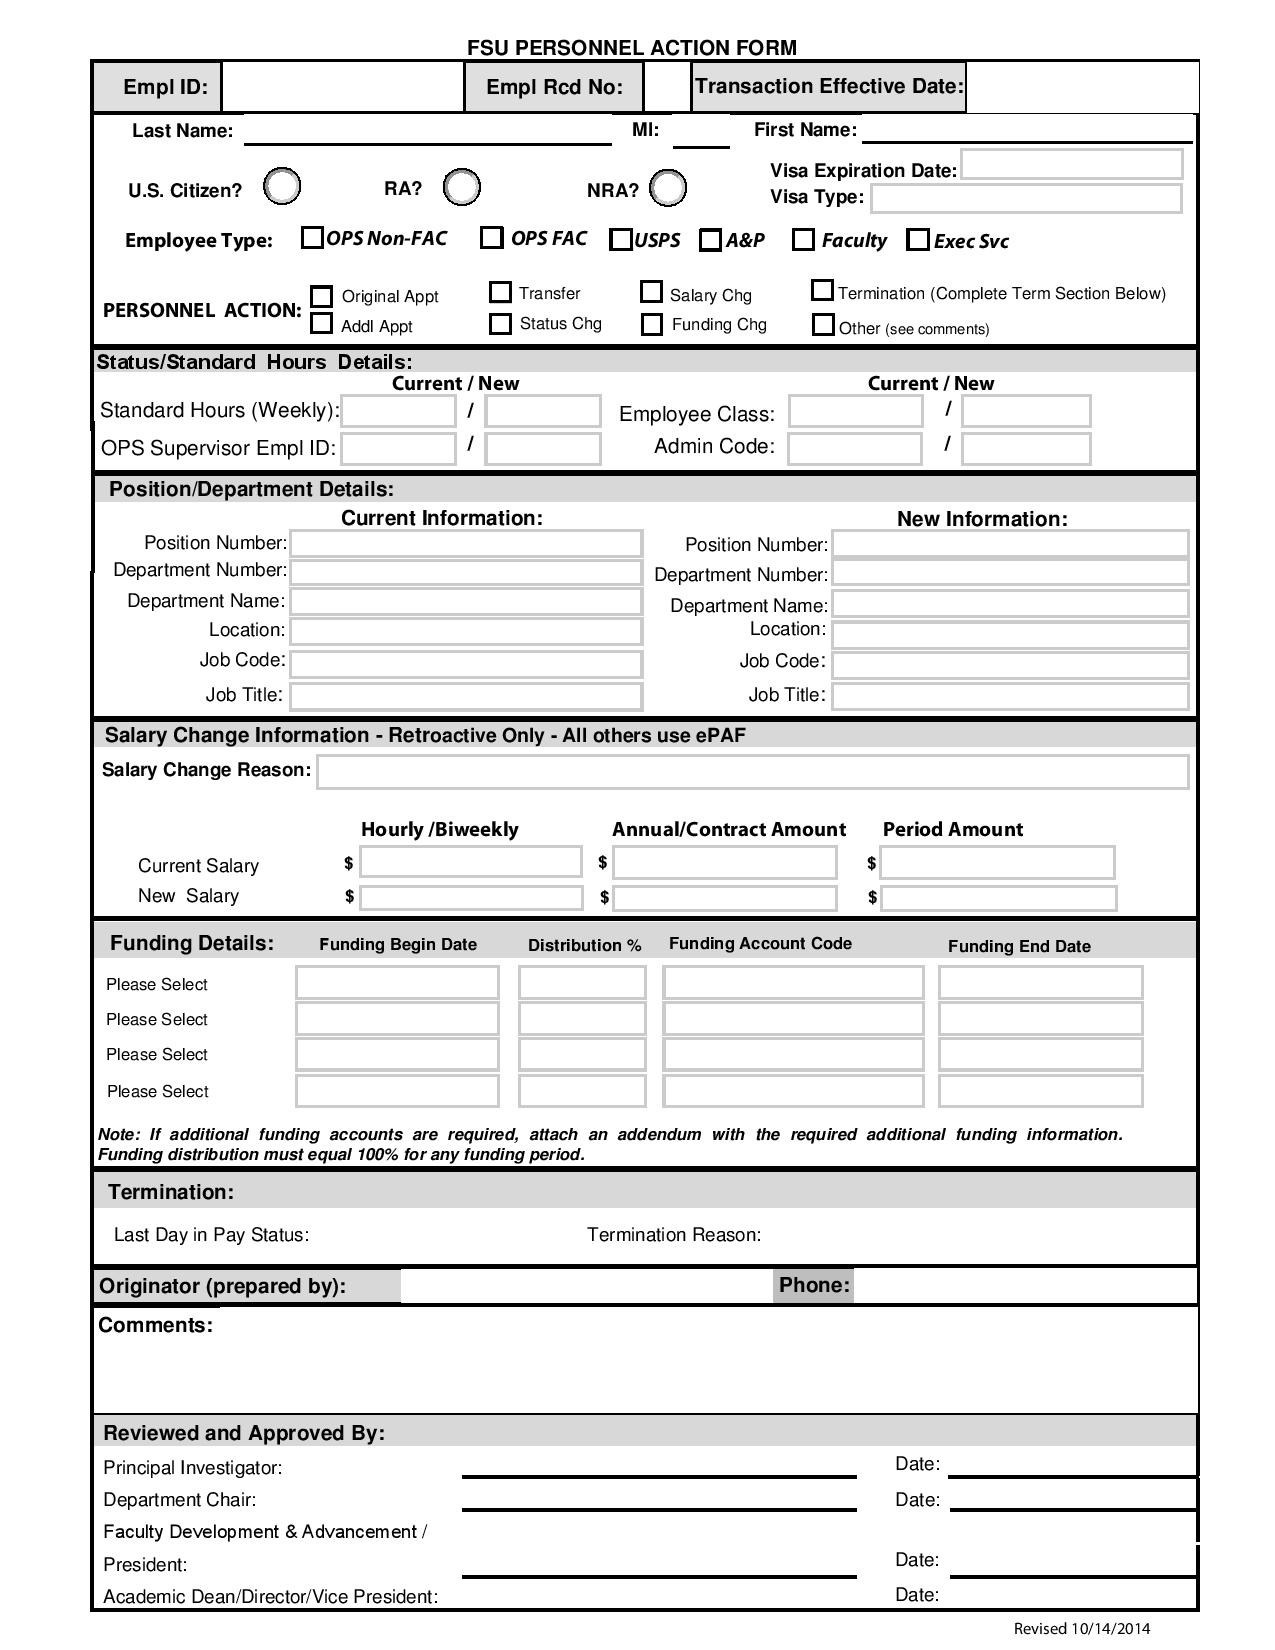 fsu personnel action form page 001